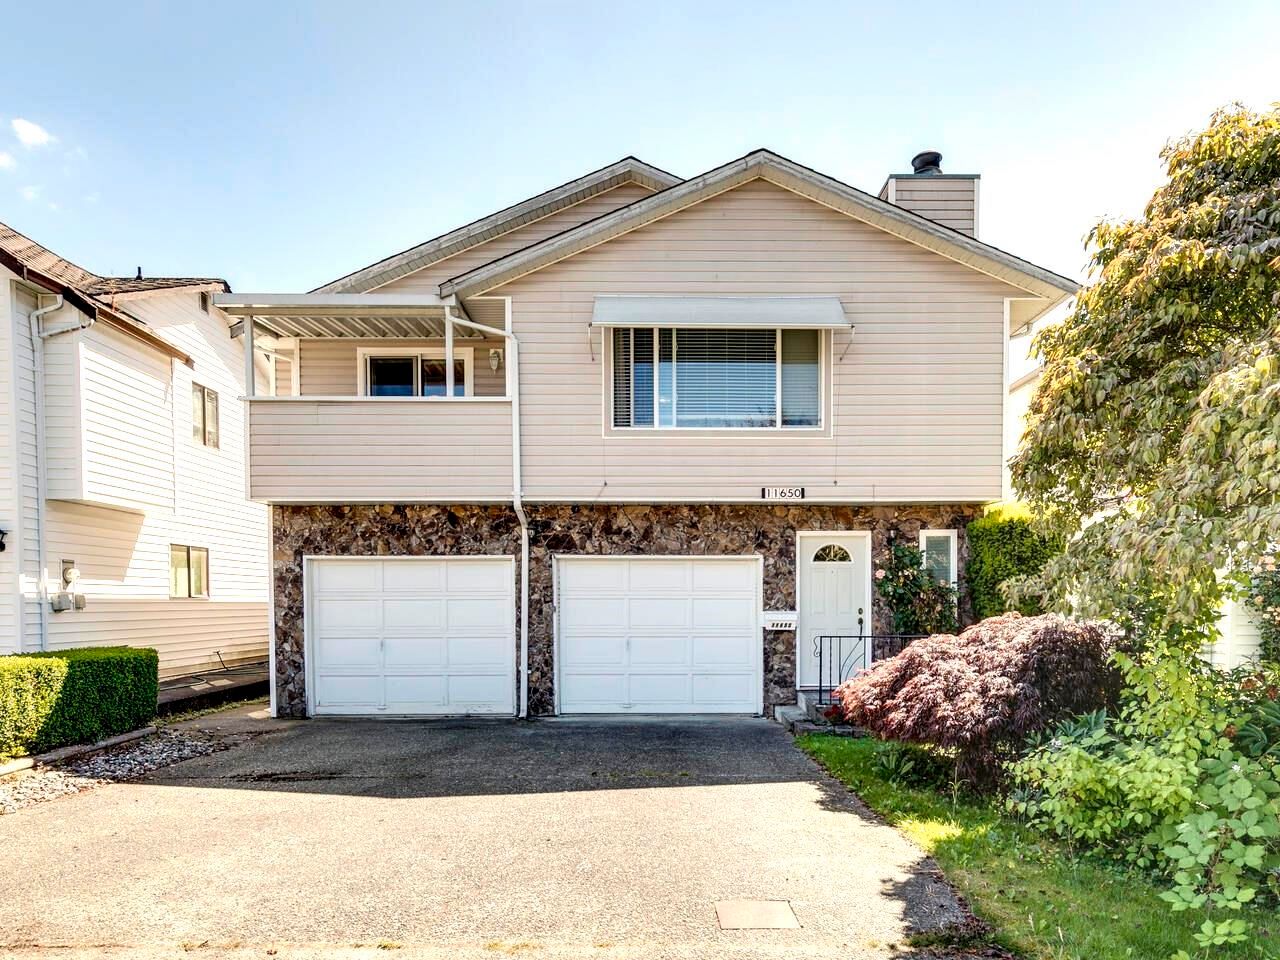 Open House on Sunday, September 11, 2022 12:00PM - 2:00PM
Gramma's house.  Spotless, gently lived in, a great location & at this price this is a great buy for a serious Buyer.  See for yourself.  You'll be very glad you did!